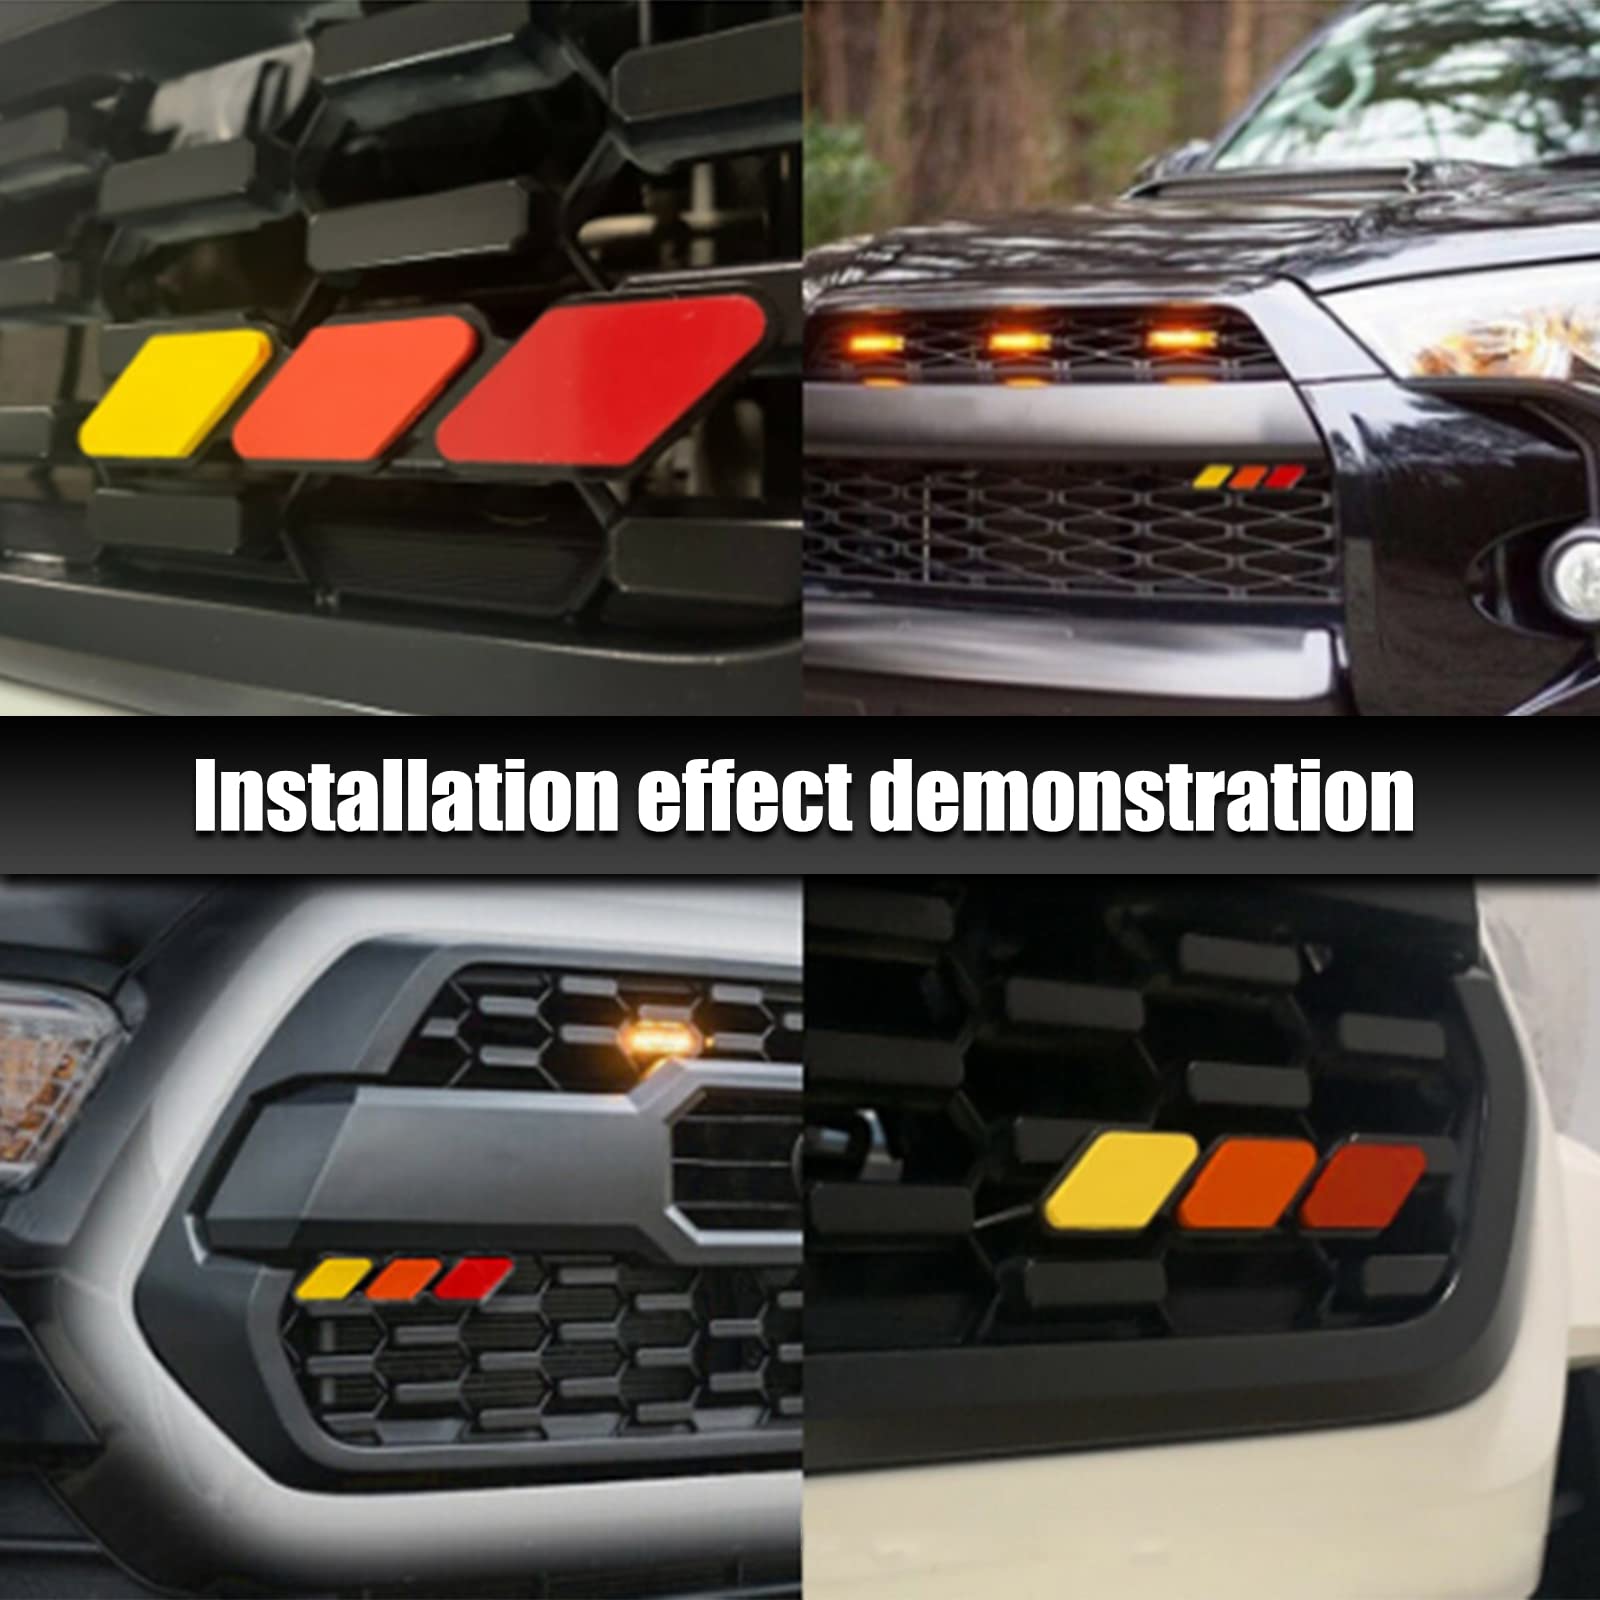 Dewkou Pack-1 Tri-Color Grille Decor Badge, Car Decoration Accessories for Toyota 4Runner Tacoma Tundra & Other Mesh or Slotted Grille (Yellow & Orange & Red)